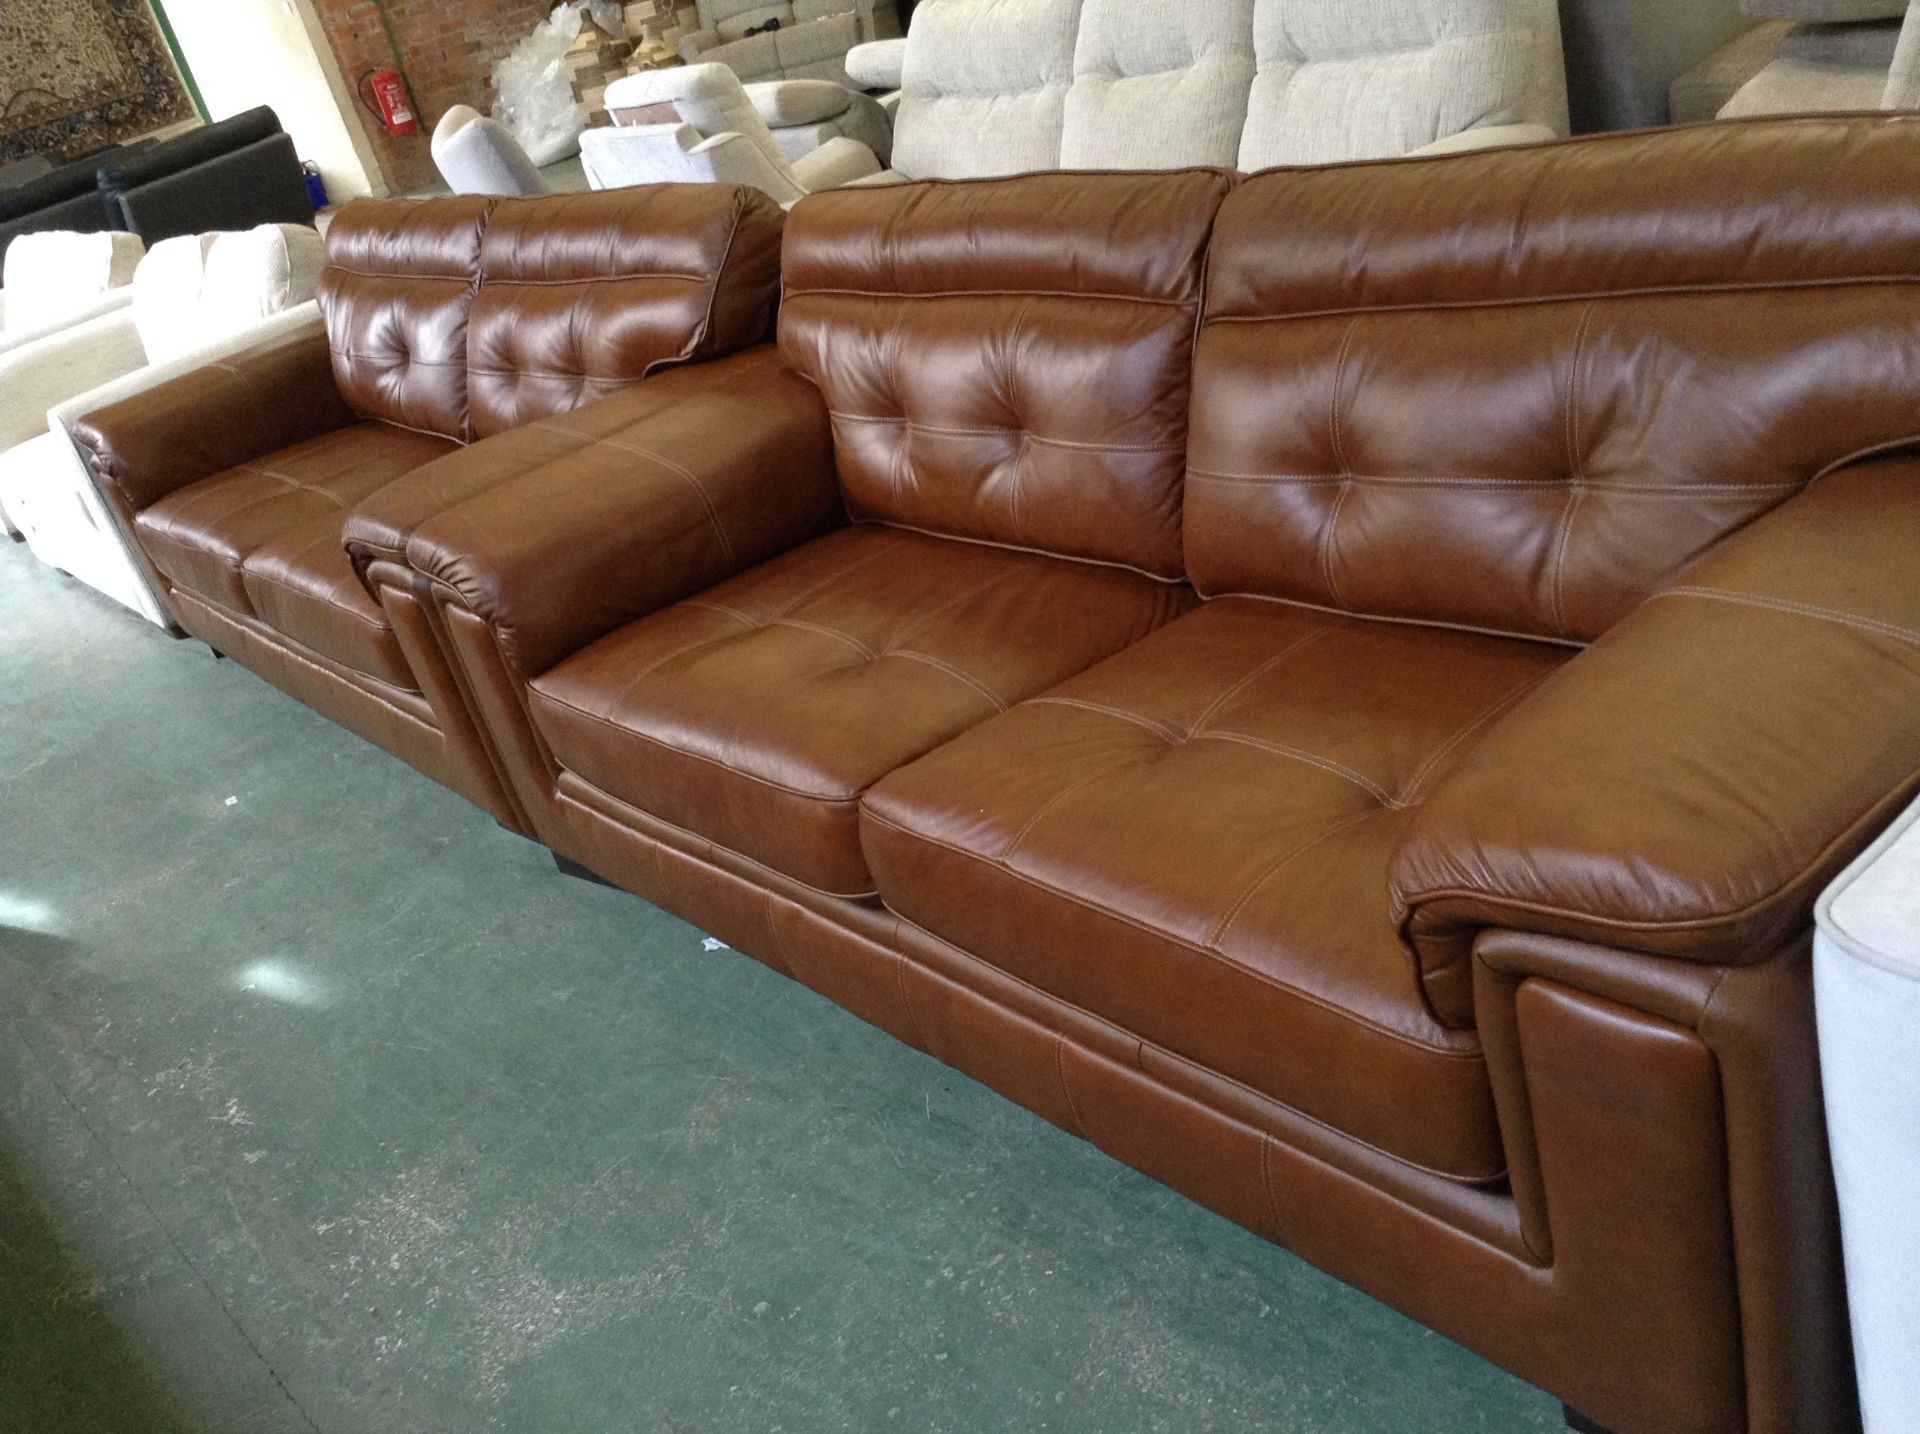 2 x BROWN LEATHER 3 SEATER SOFAS WITH WHITE STITCH (30512-30513)